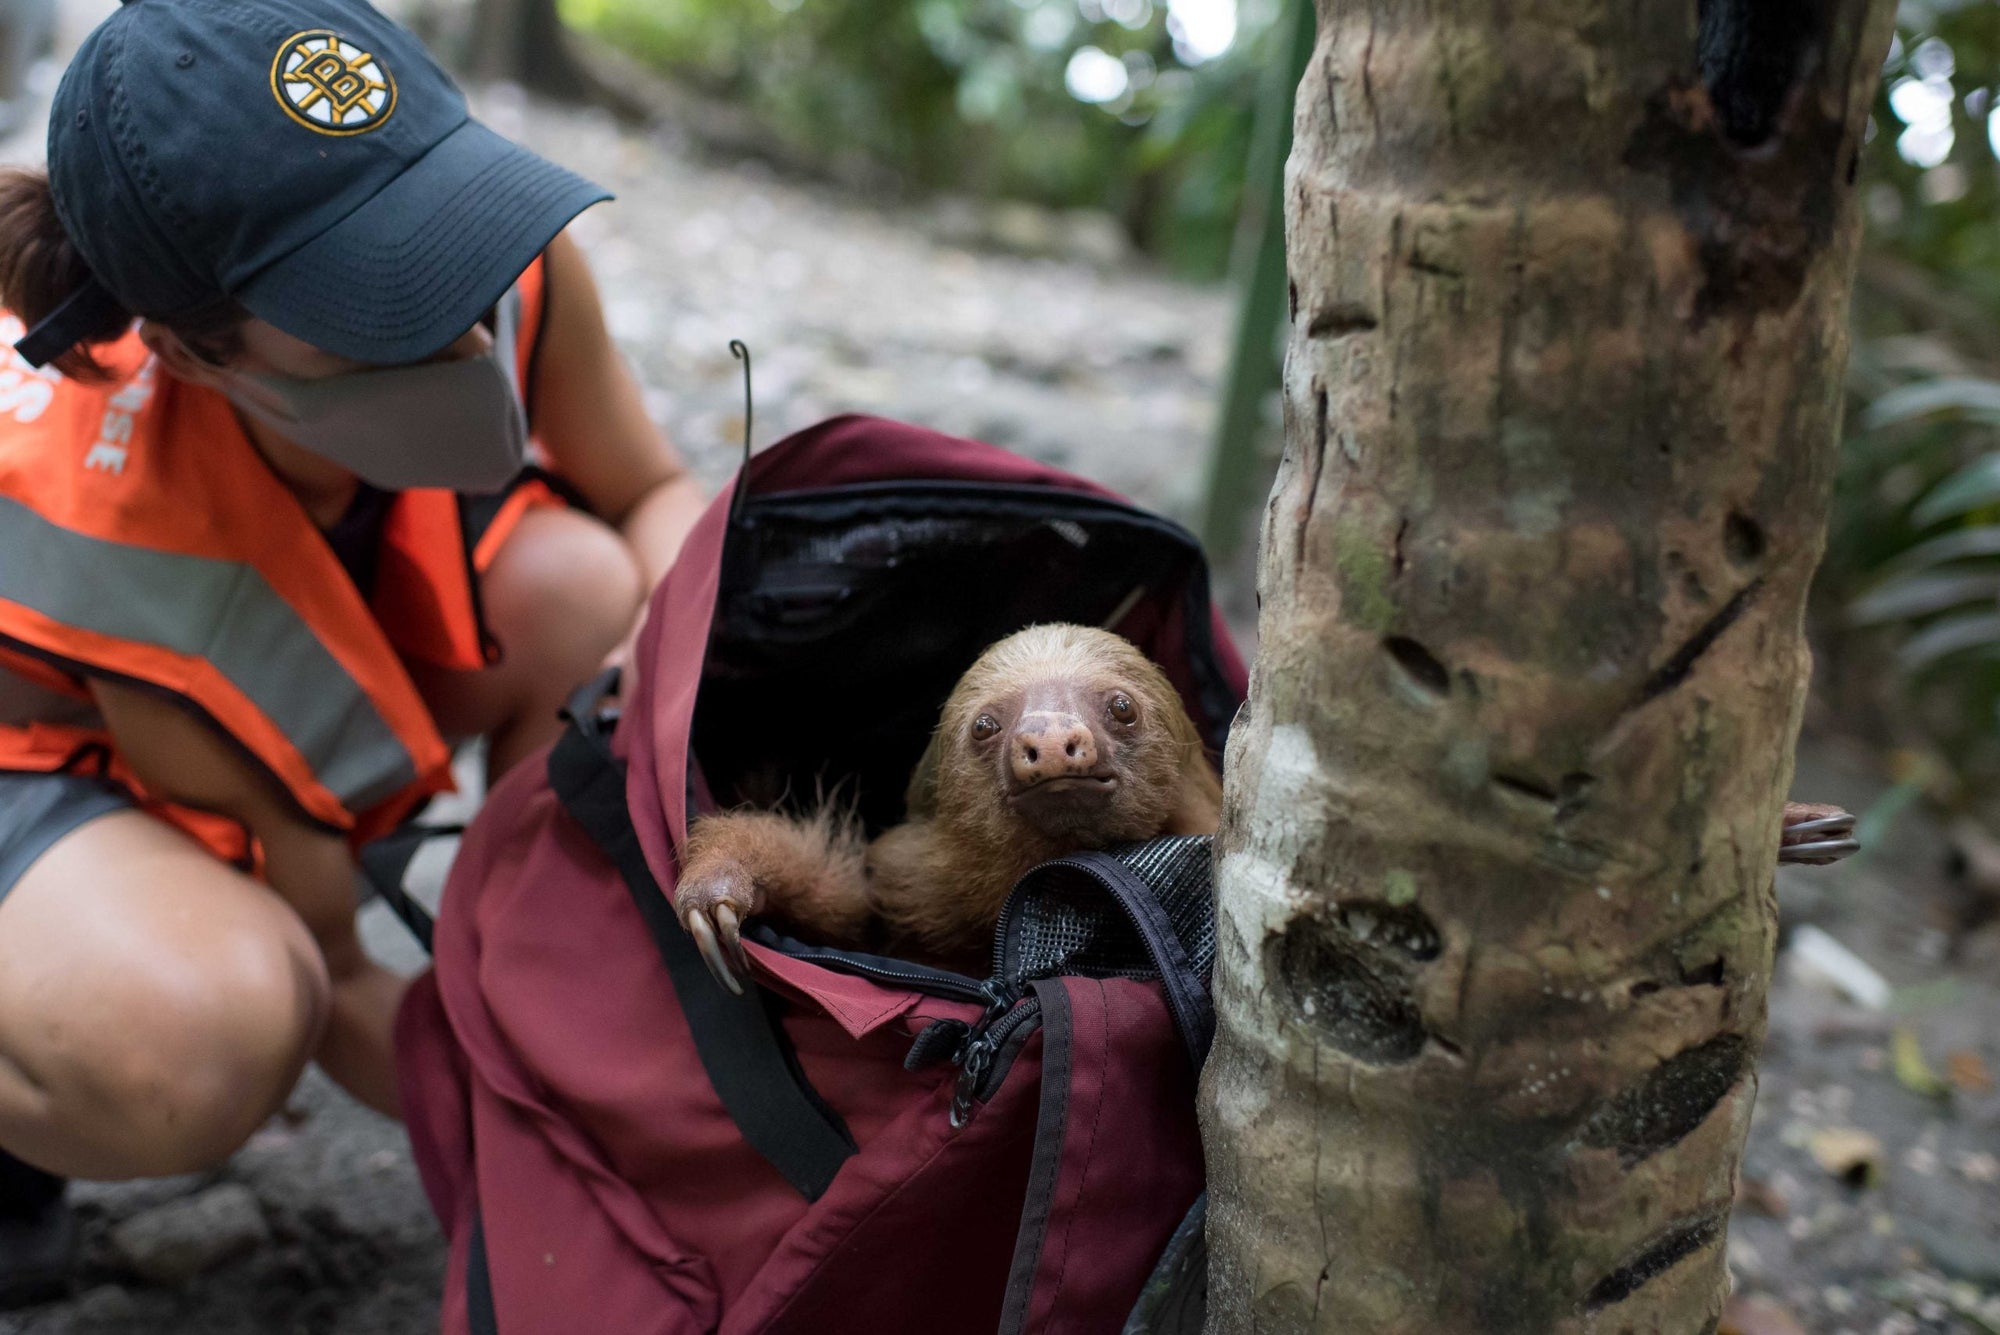 The 7 greatest threats to sloths in the Costa Rica, and what can be done to help